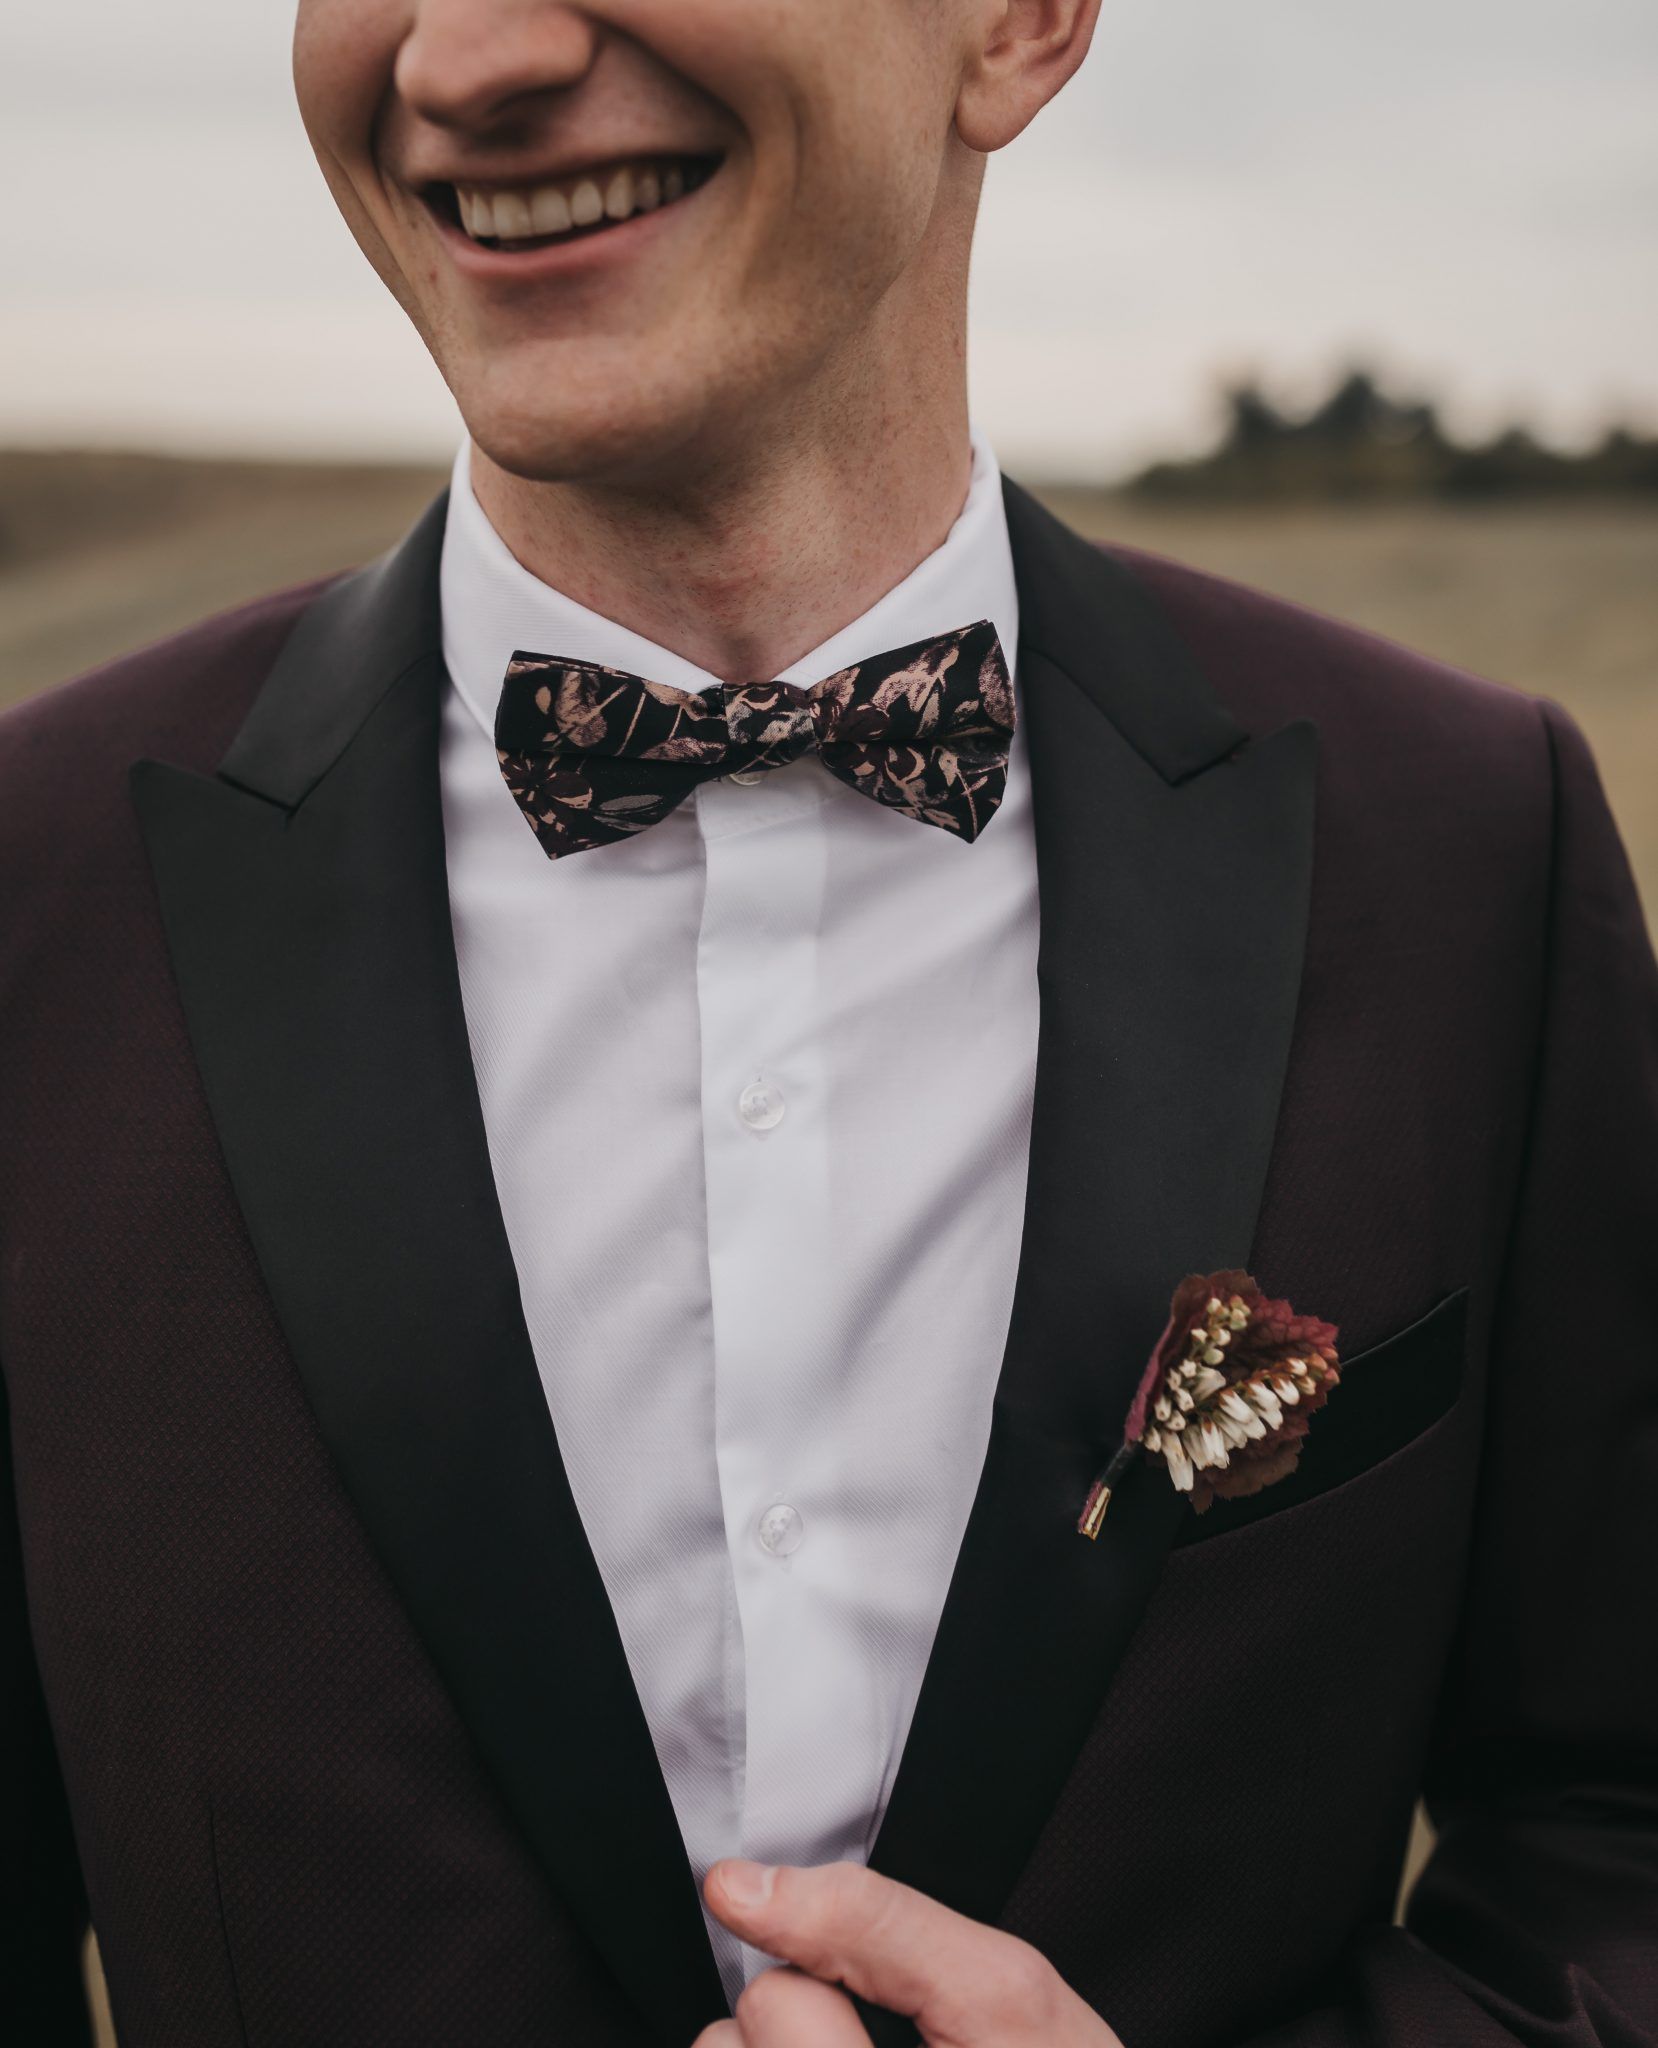 Looking Dapper: 10 Looks for the Modern Groom - on the Bronte Bride Blog, groom style, Calgary Wedding Inspiration Blog, stud, maroon suit, bowtie, suave, handsome, charming